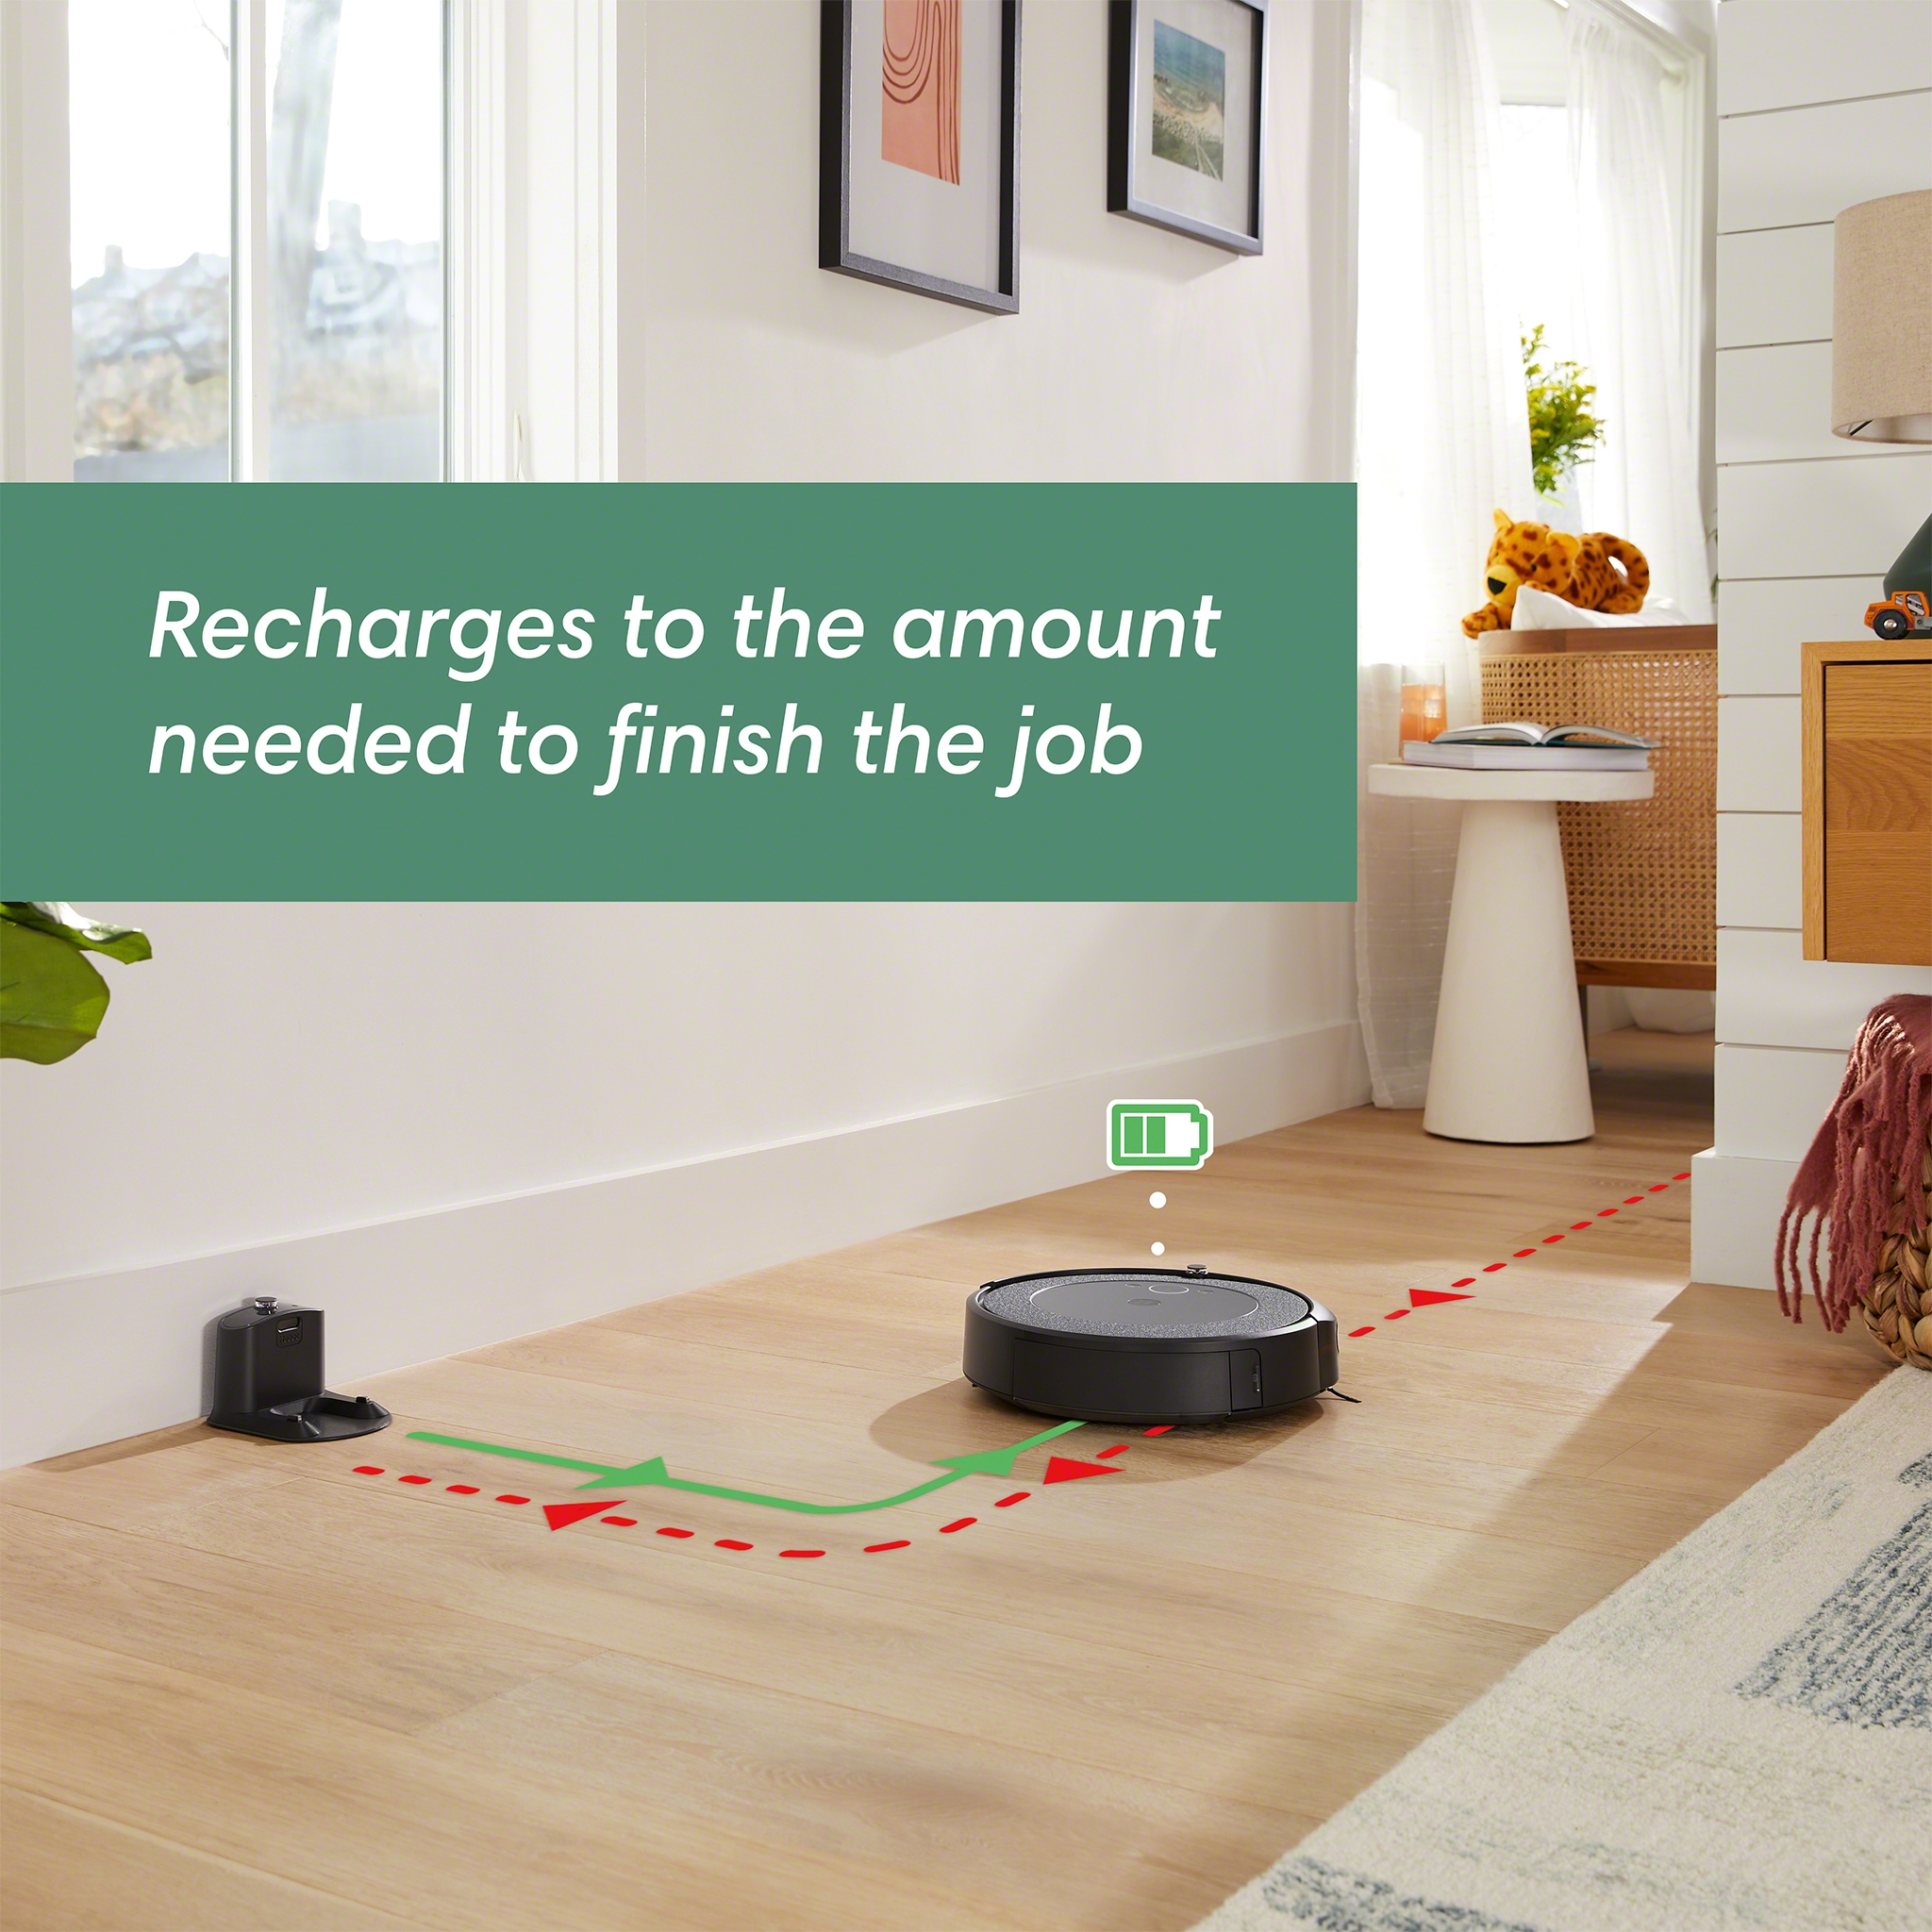 iRobot® Roomba® i3 EVO (3150) Wi-Fi Connected Robot Vacuum – Now Clean by Room with Smart Mapping, Works with Google, Ideal for Pet Hair, Carpets & Hard Floors - image 6 of 14